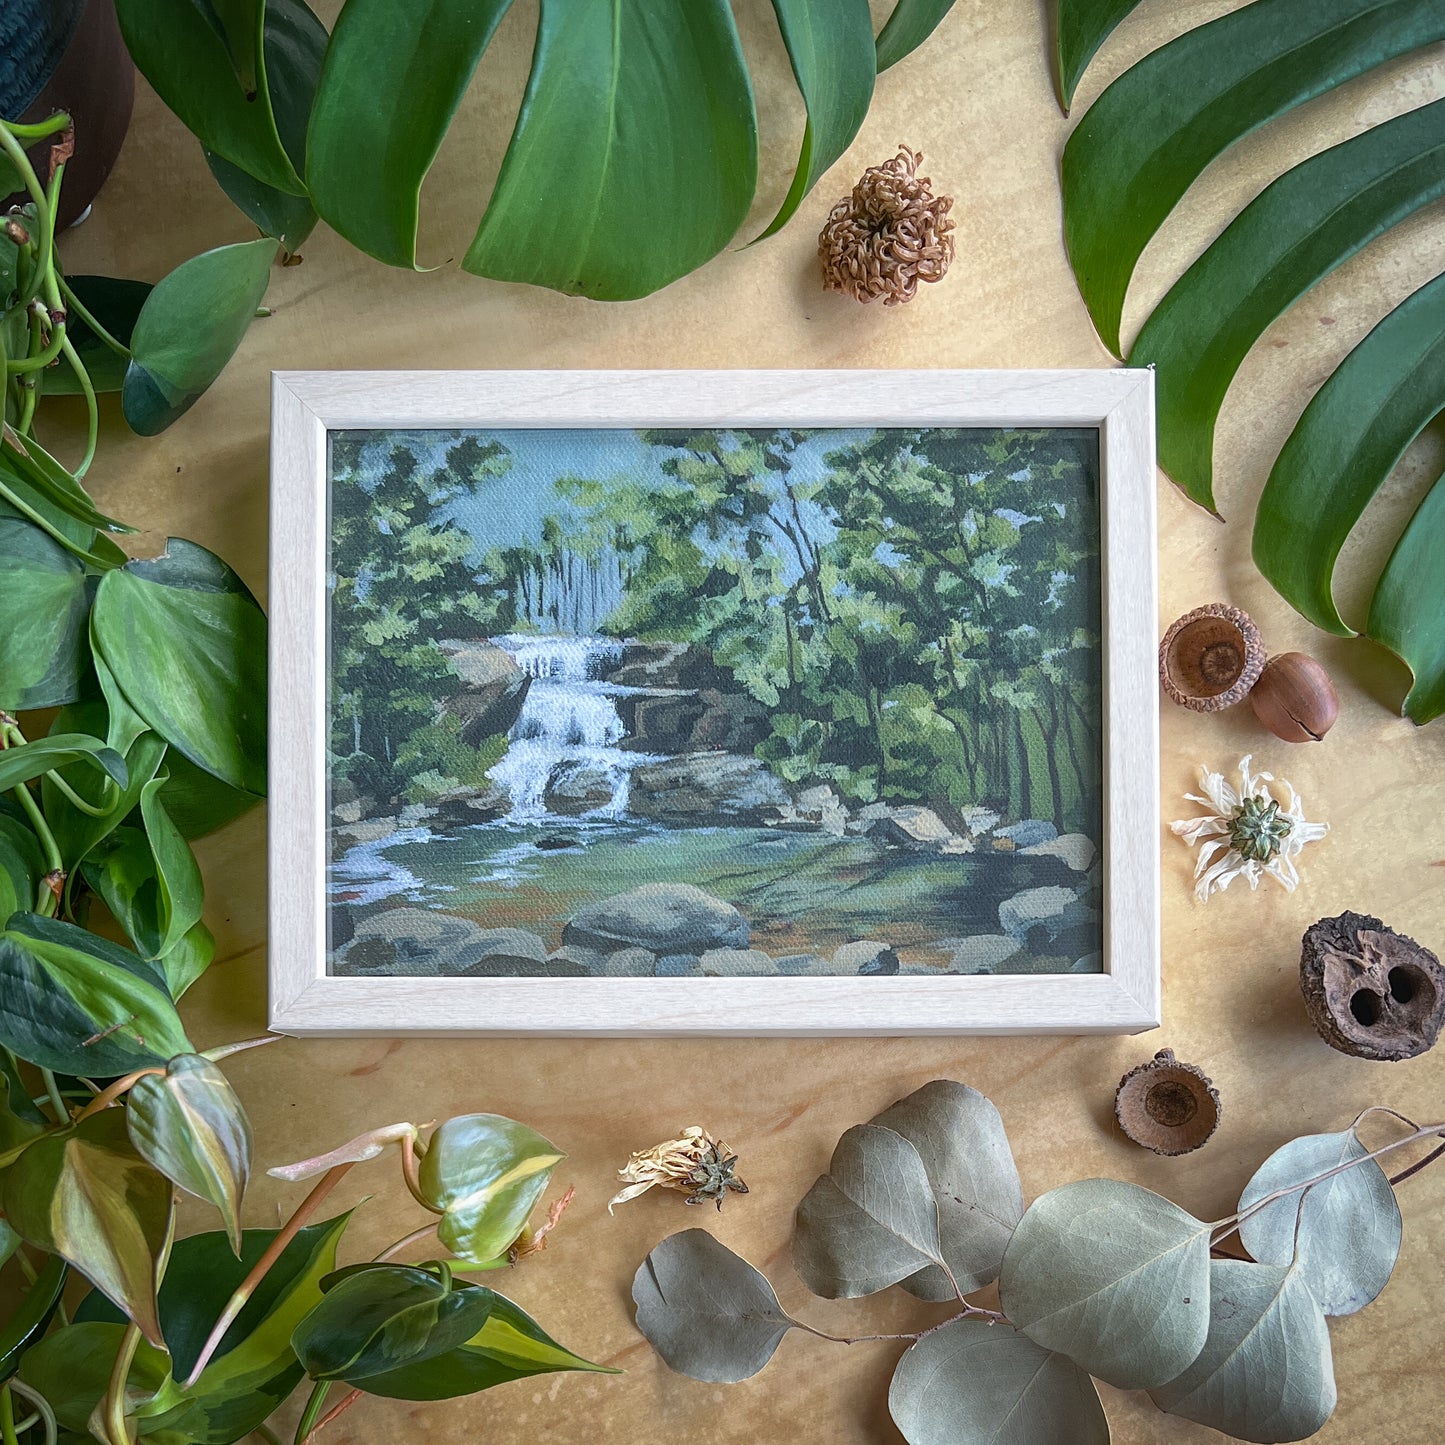 Canvas print of a waterfall landscape in a light wood frame displayed on a wood table with plants and other natural items scattered around it